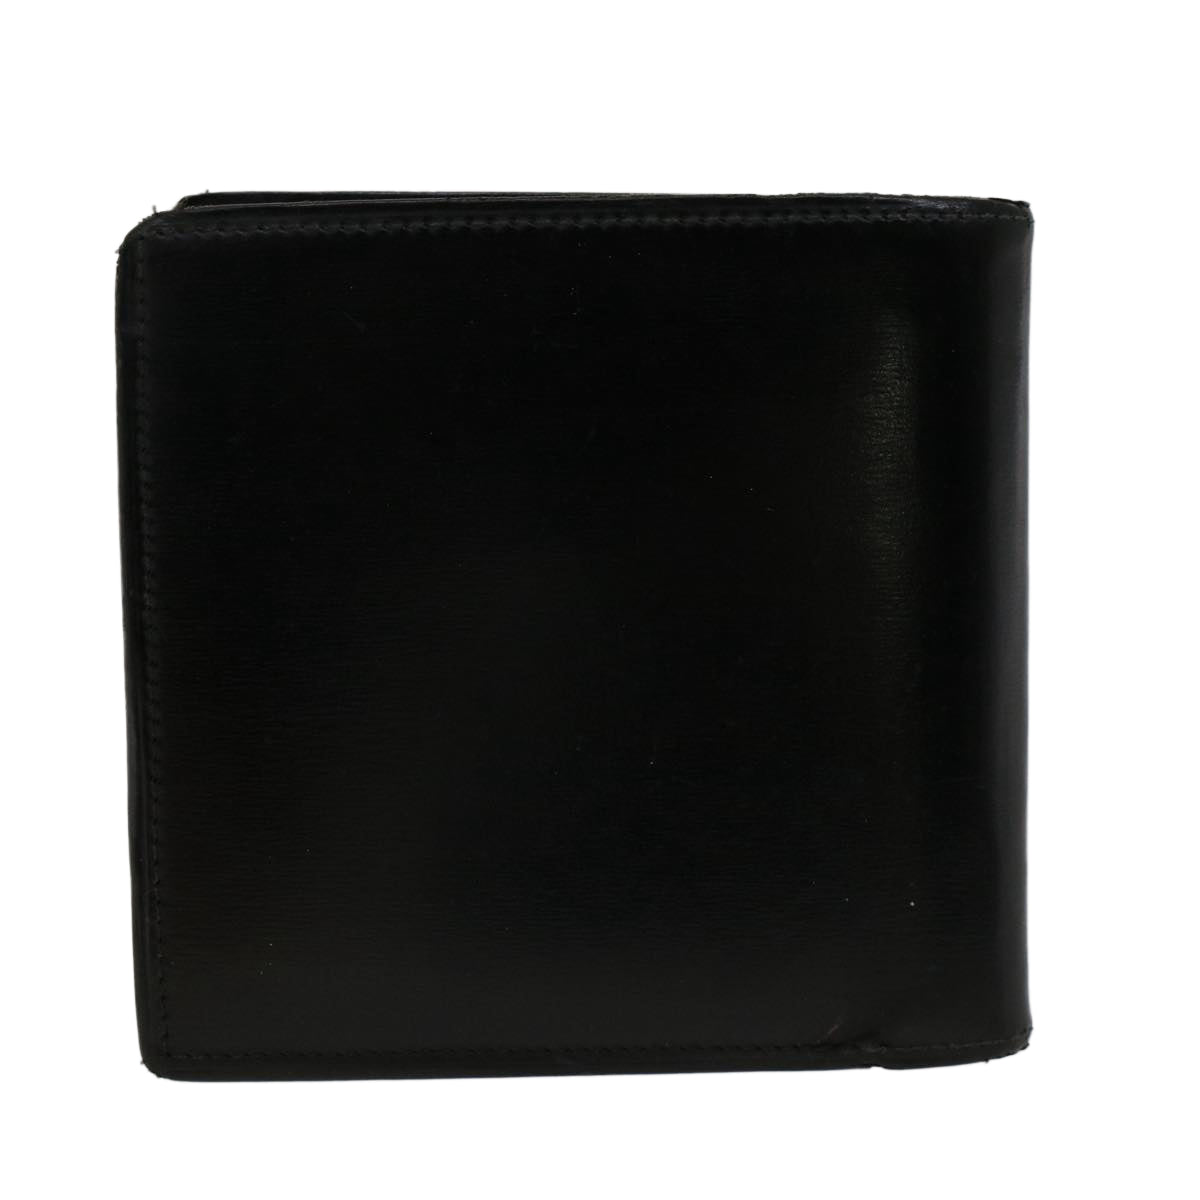 CARTIER Wallet Leather Black Auth 50843 - 0